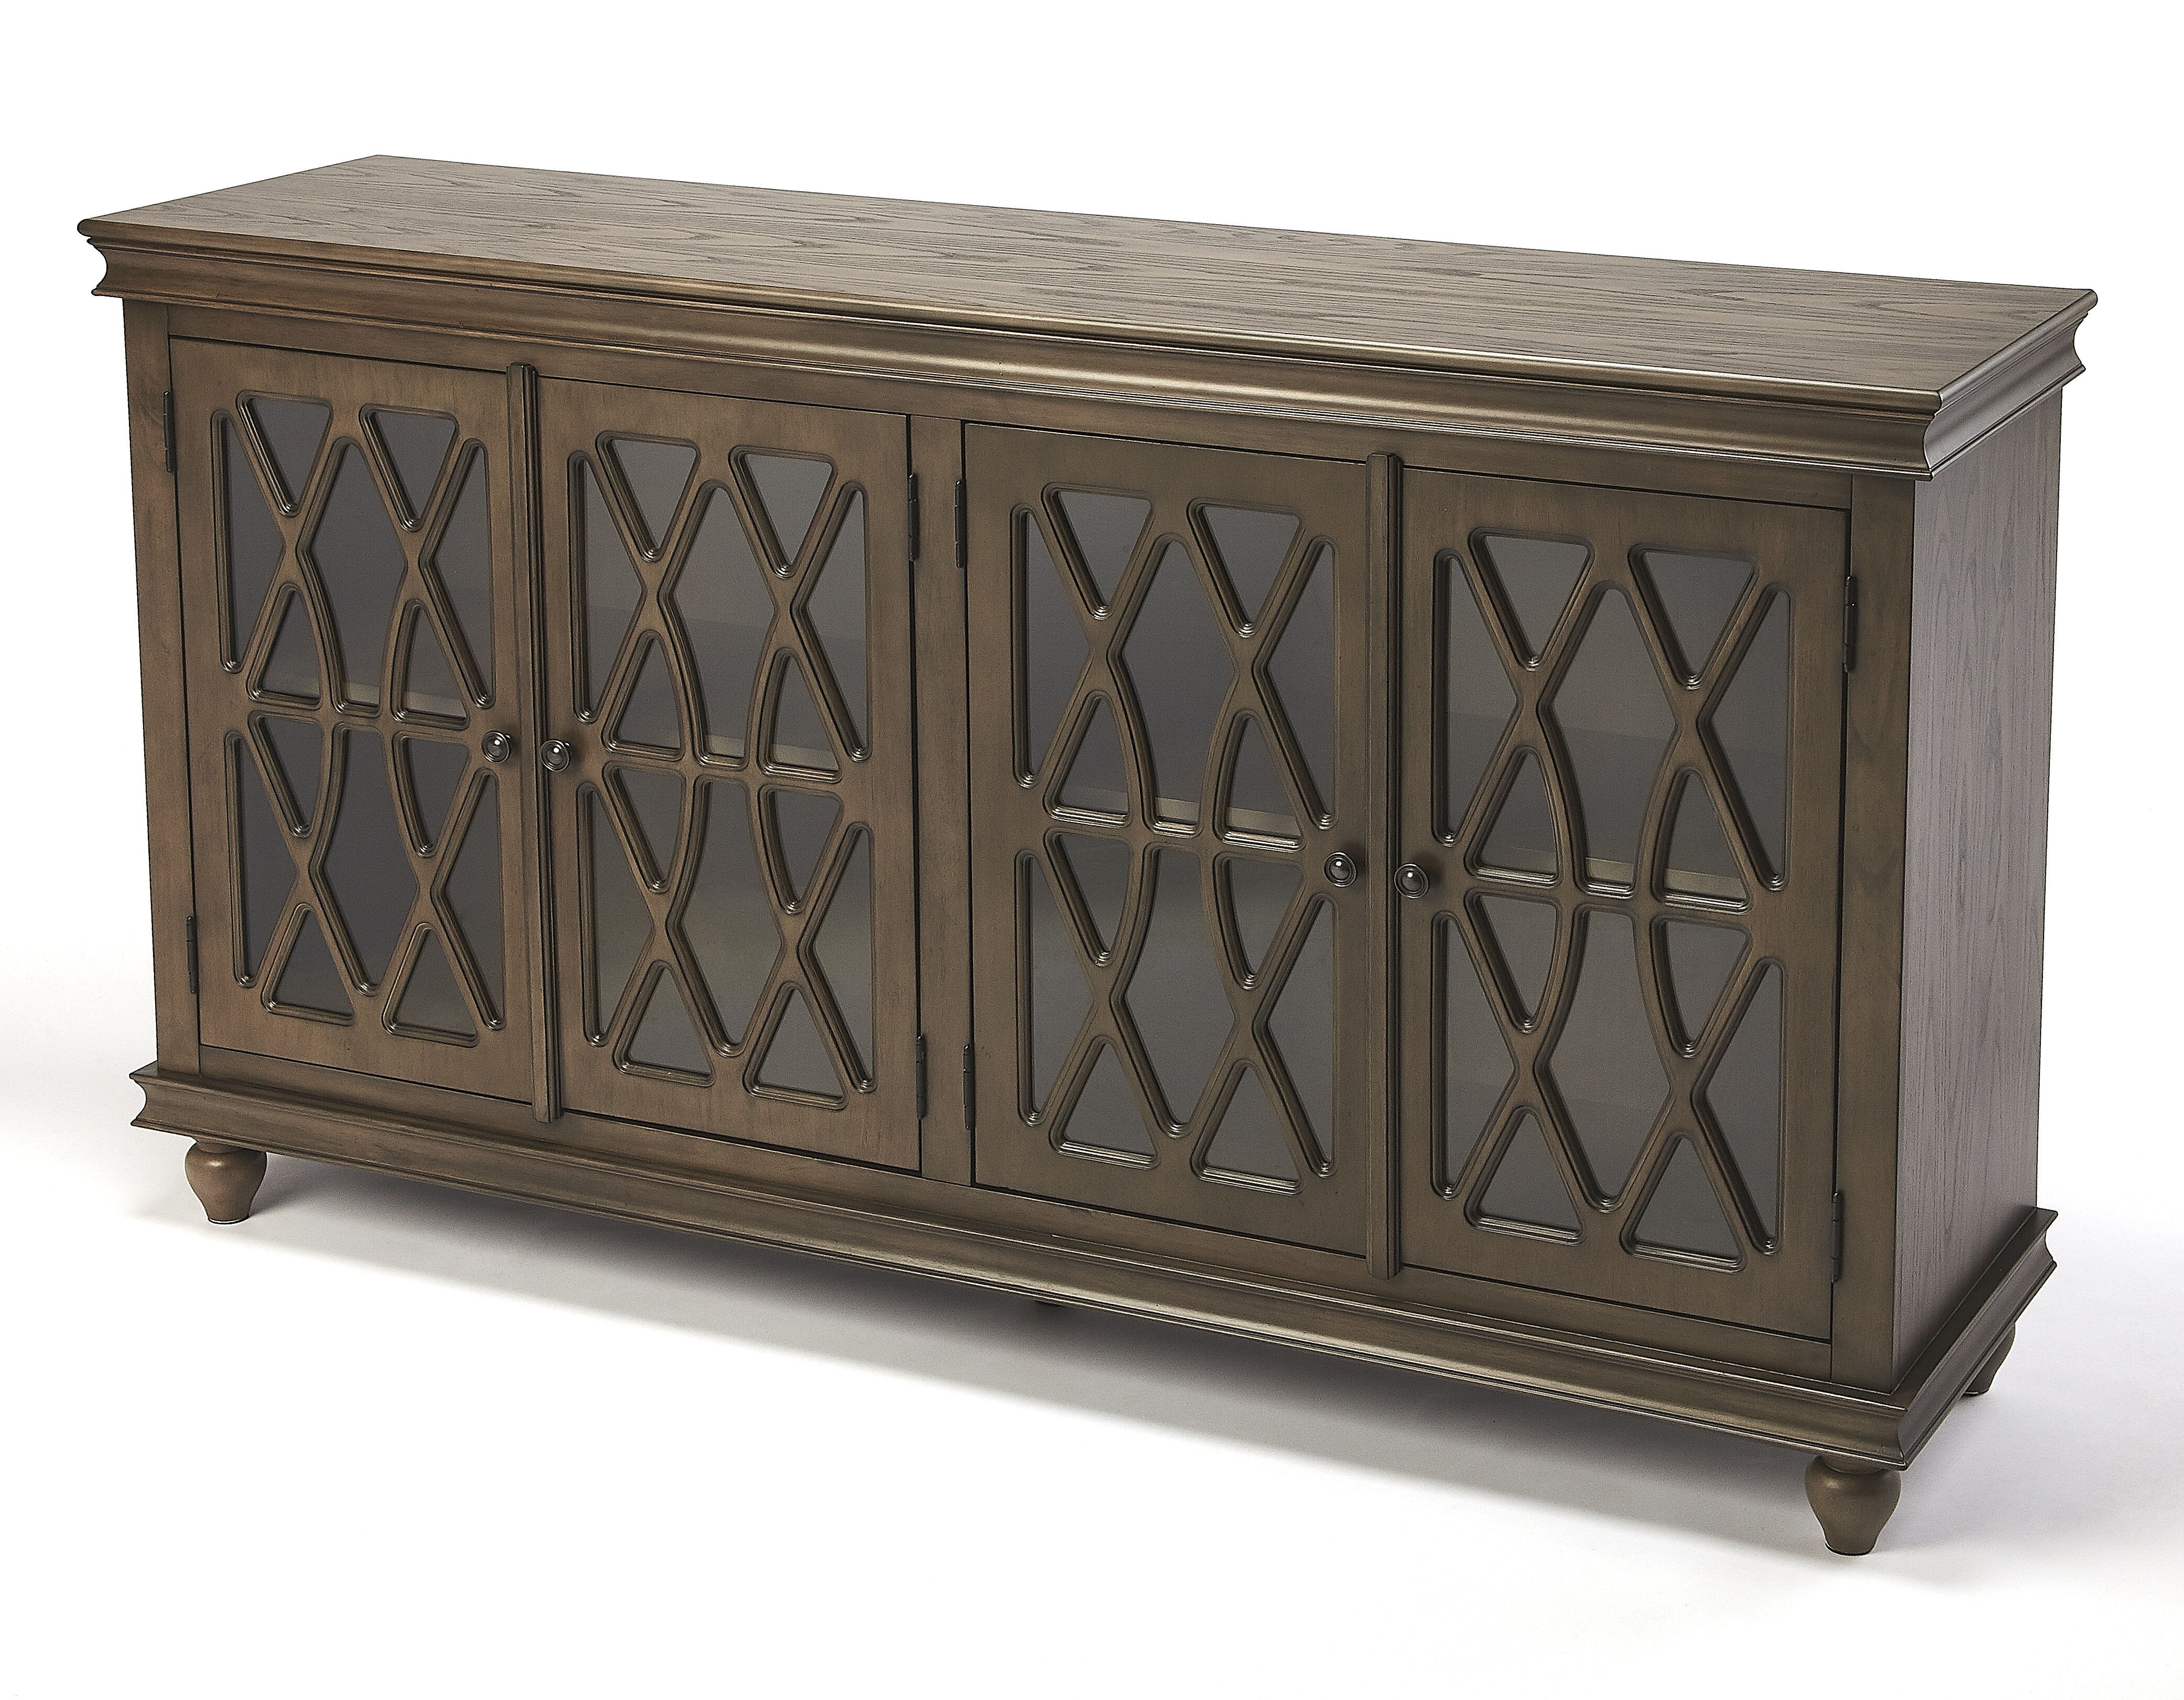 Lansing Sideboard Throughout Tott And Eling Sideboards (View 11 of 30)